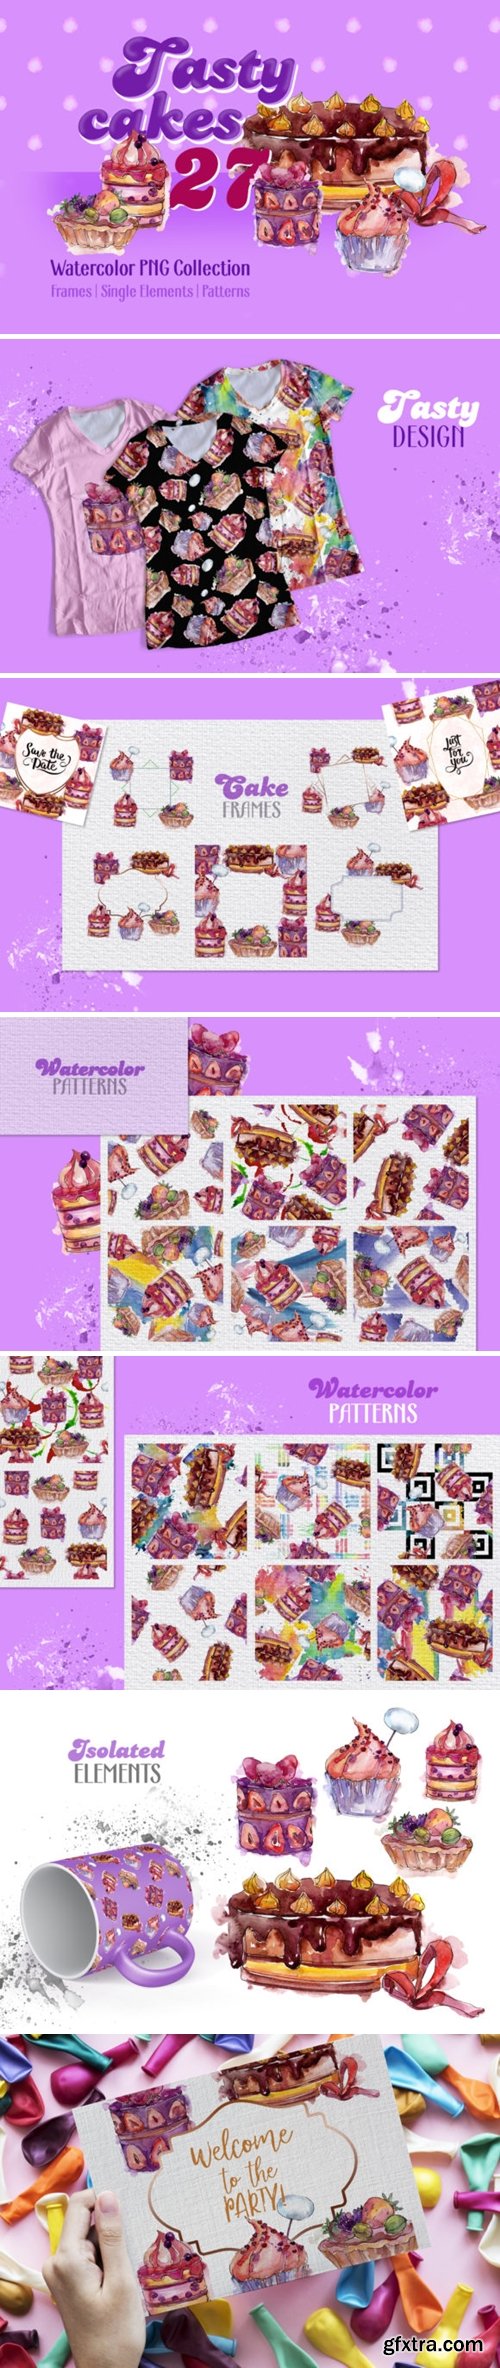 CM - Tasty cakes violet Watercolor png 3739021